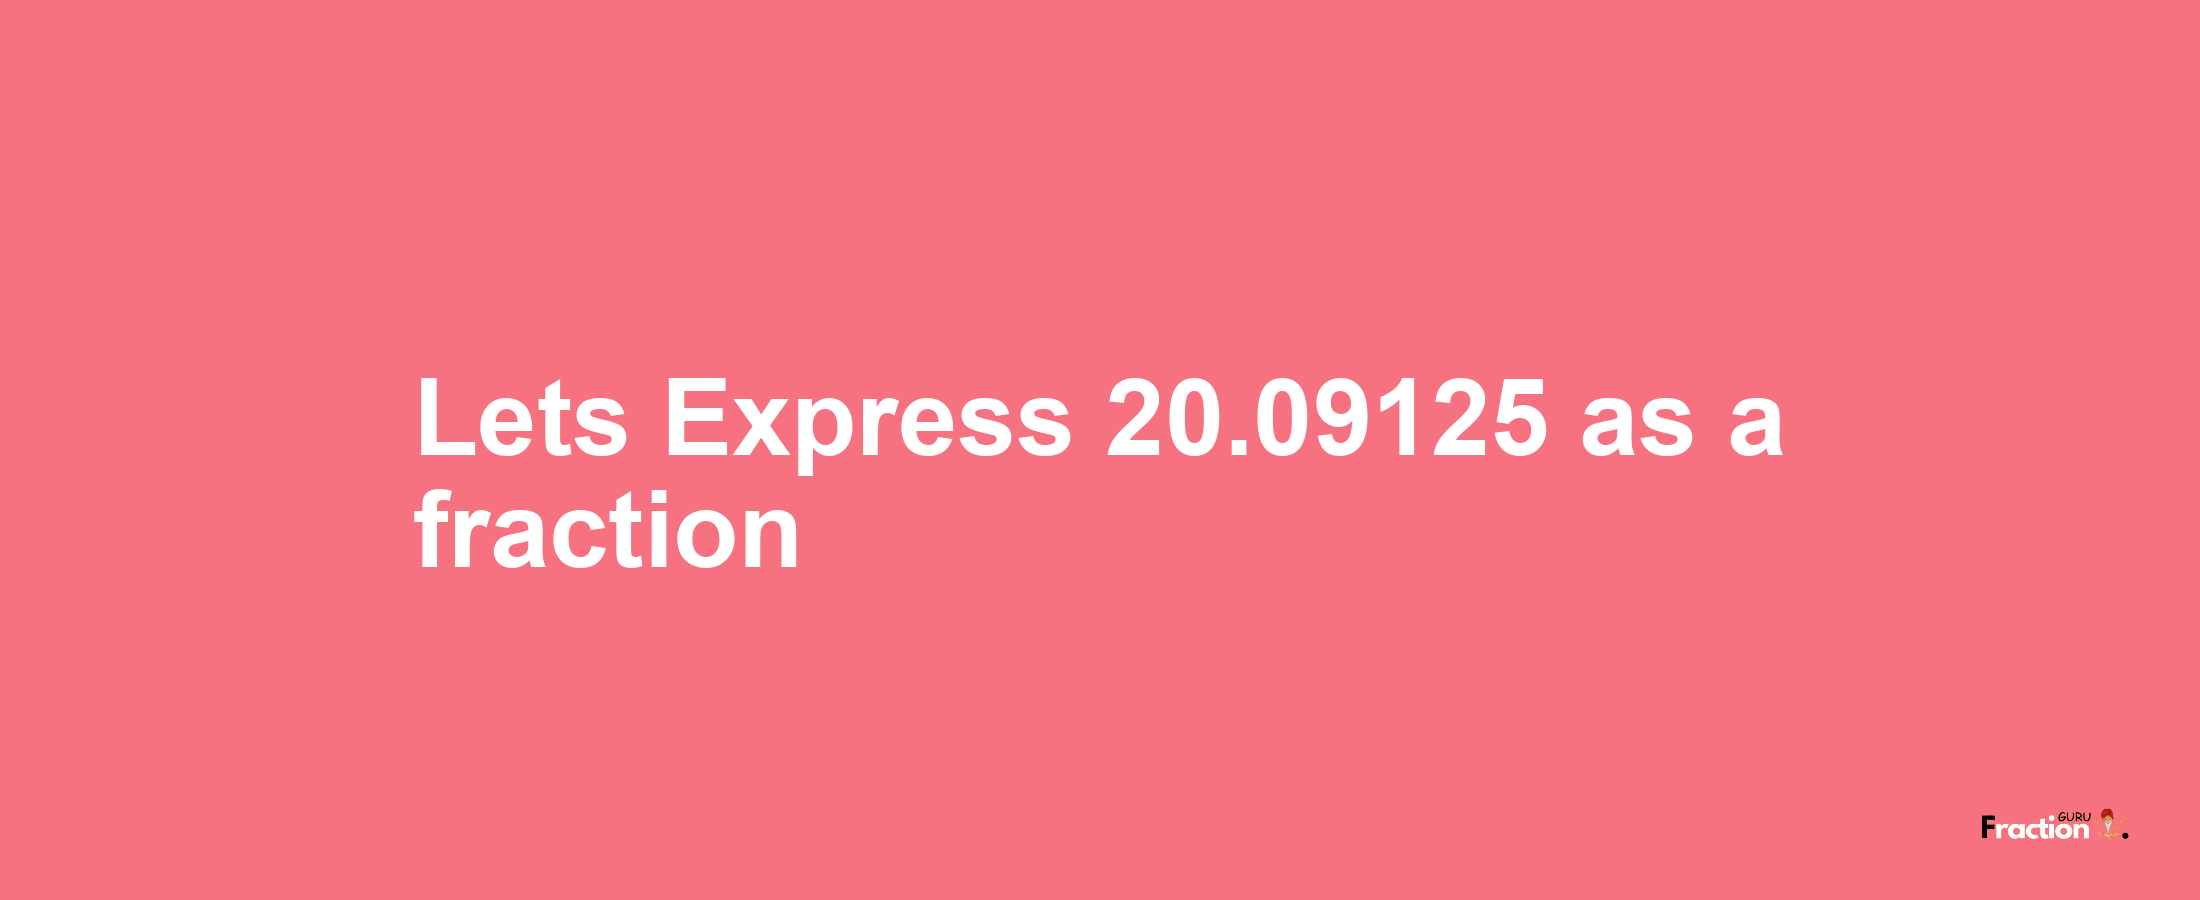 Lets Express 20.09125 as afraction